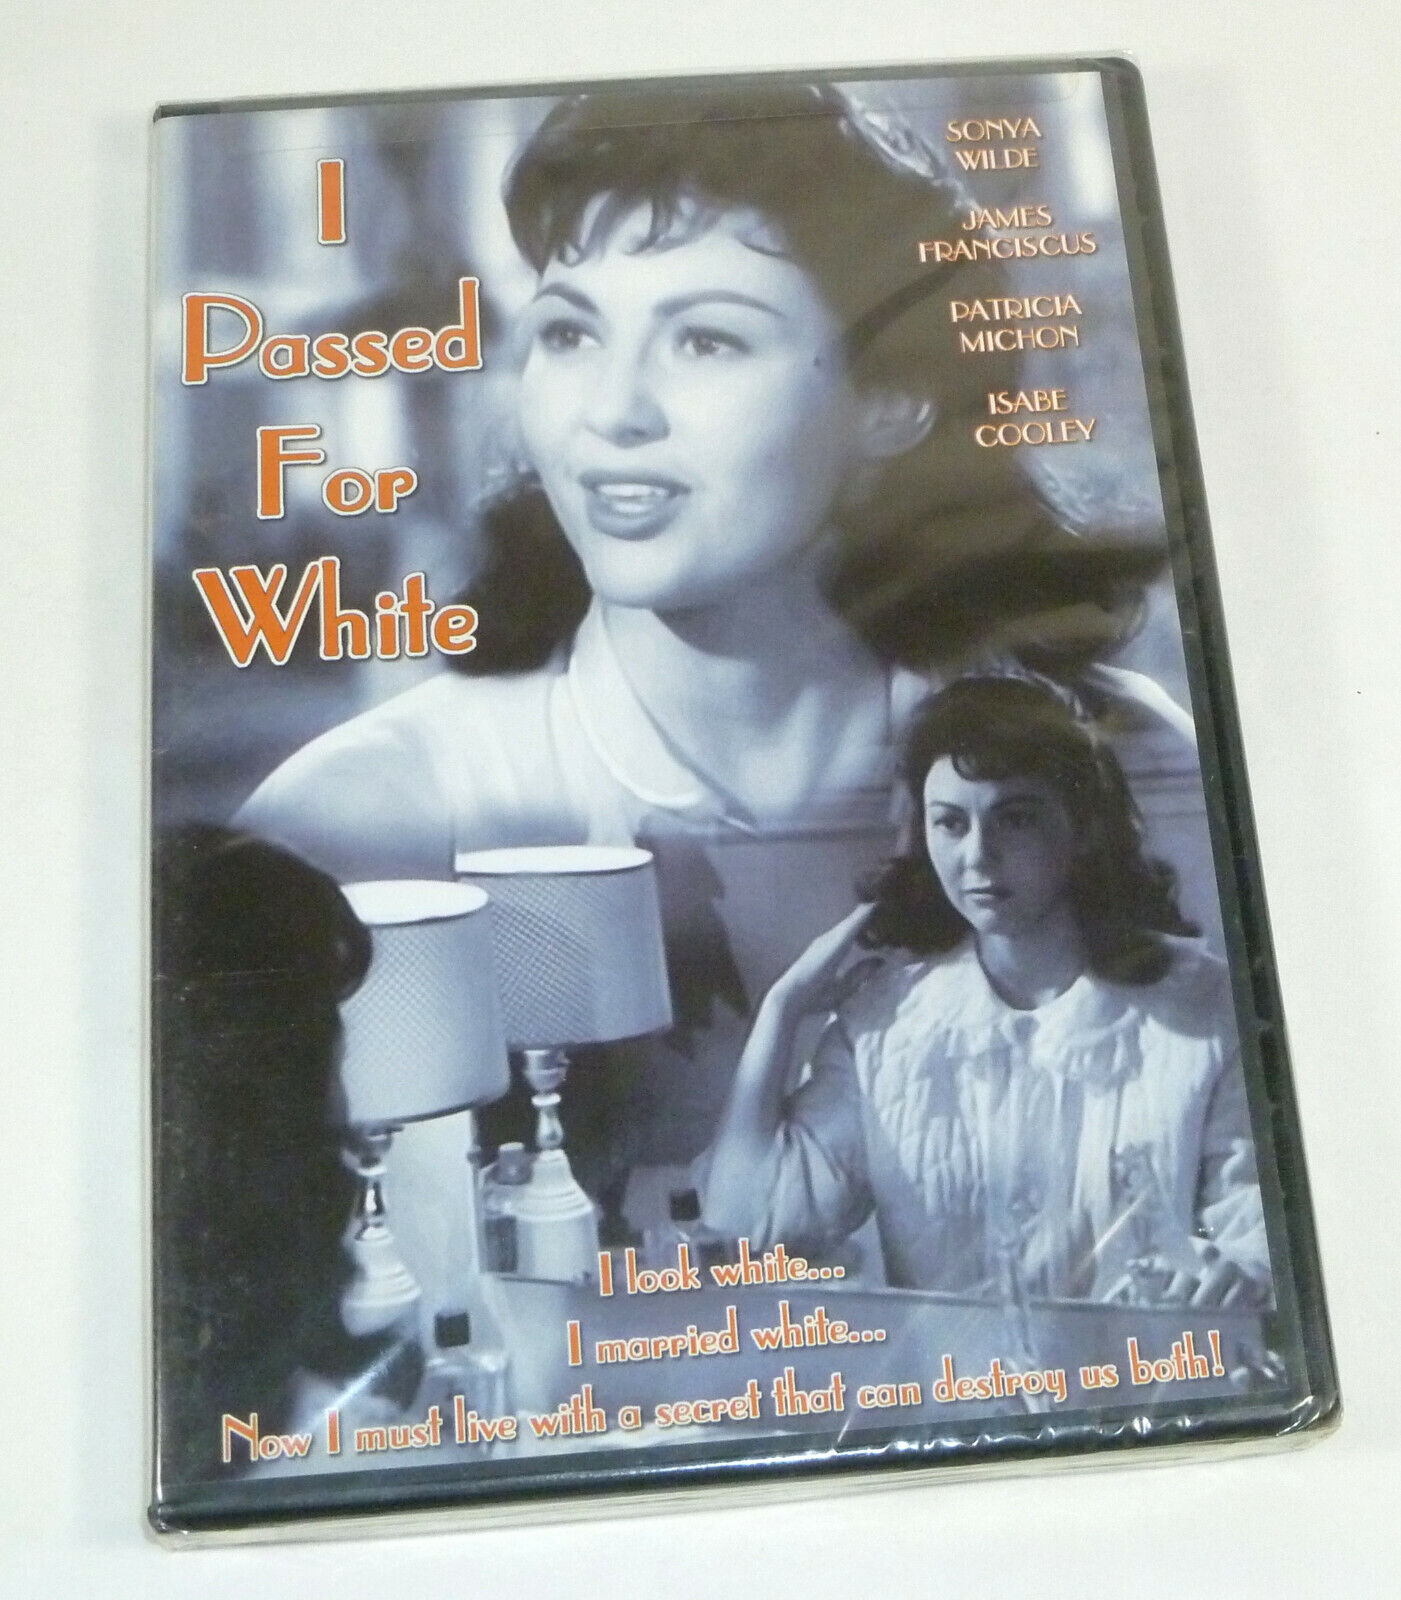 I Passed for White (1960) New DVD Sonya Wilde, James Franciscus